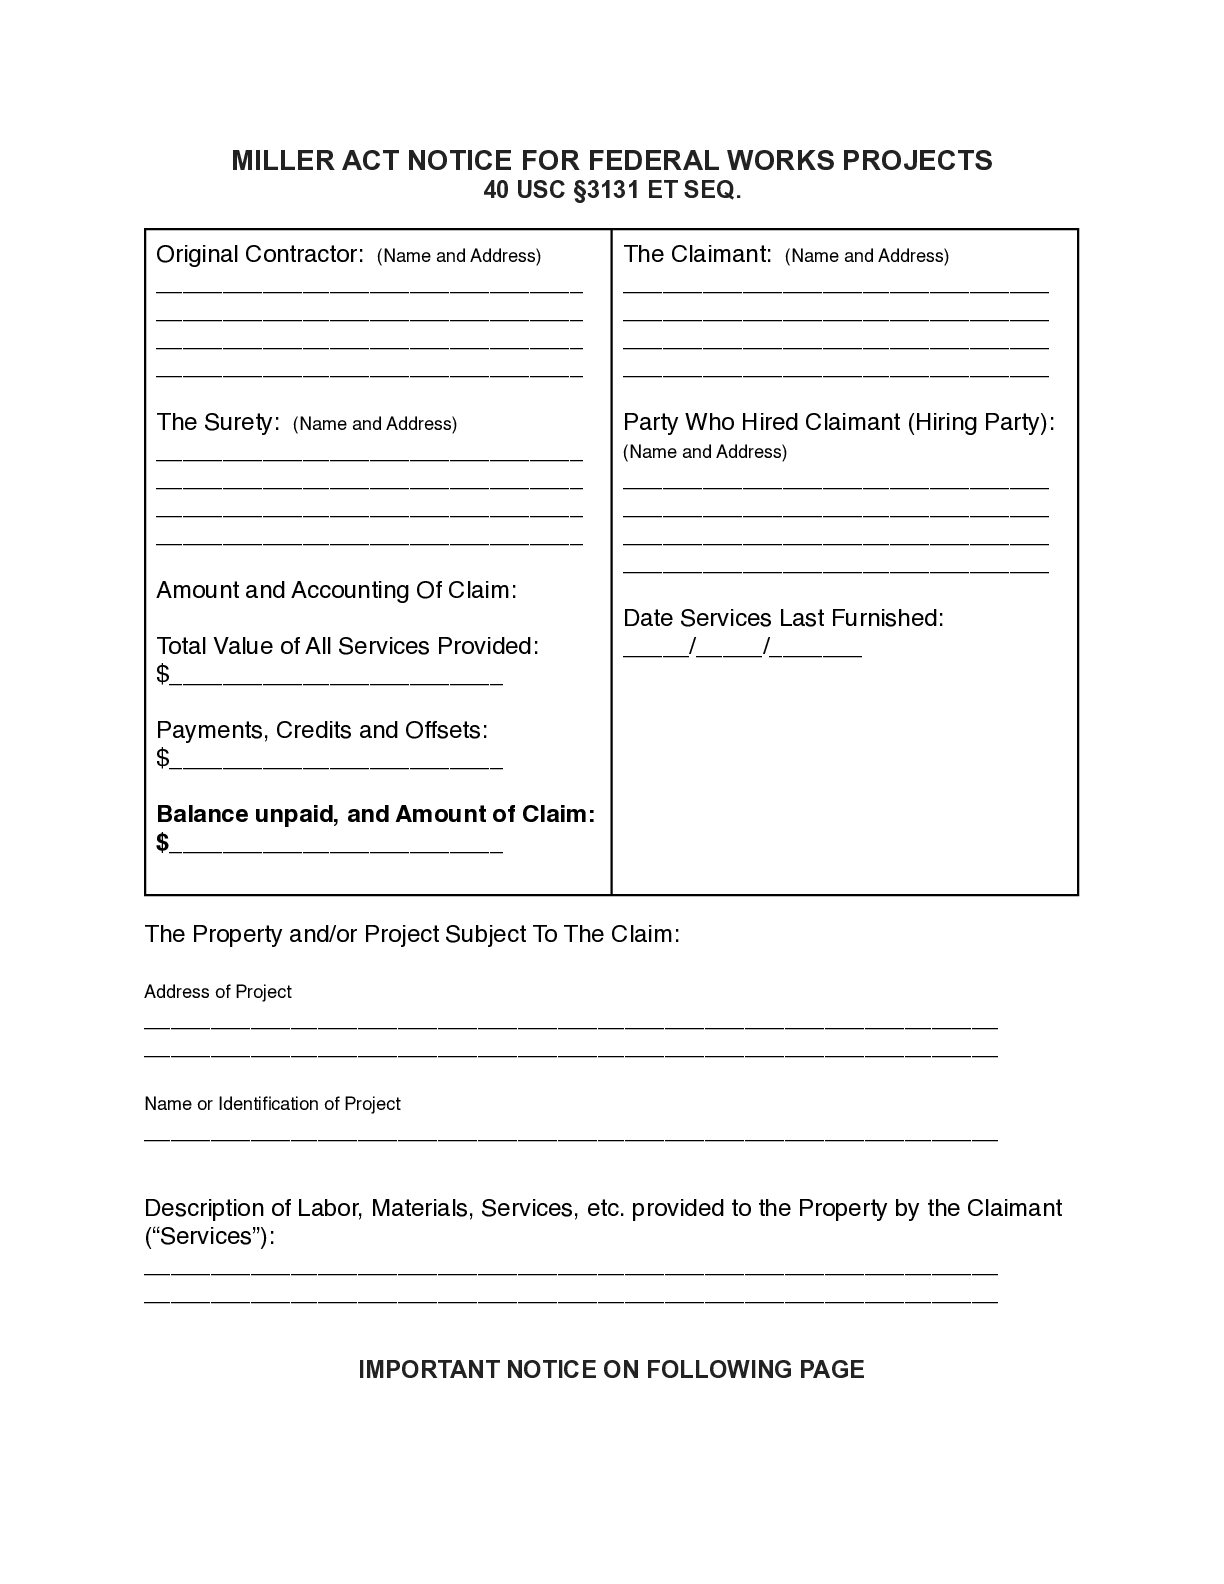 Miller Act Claim Form